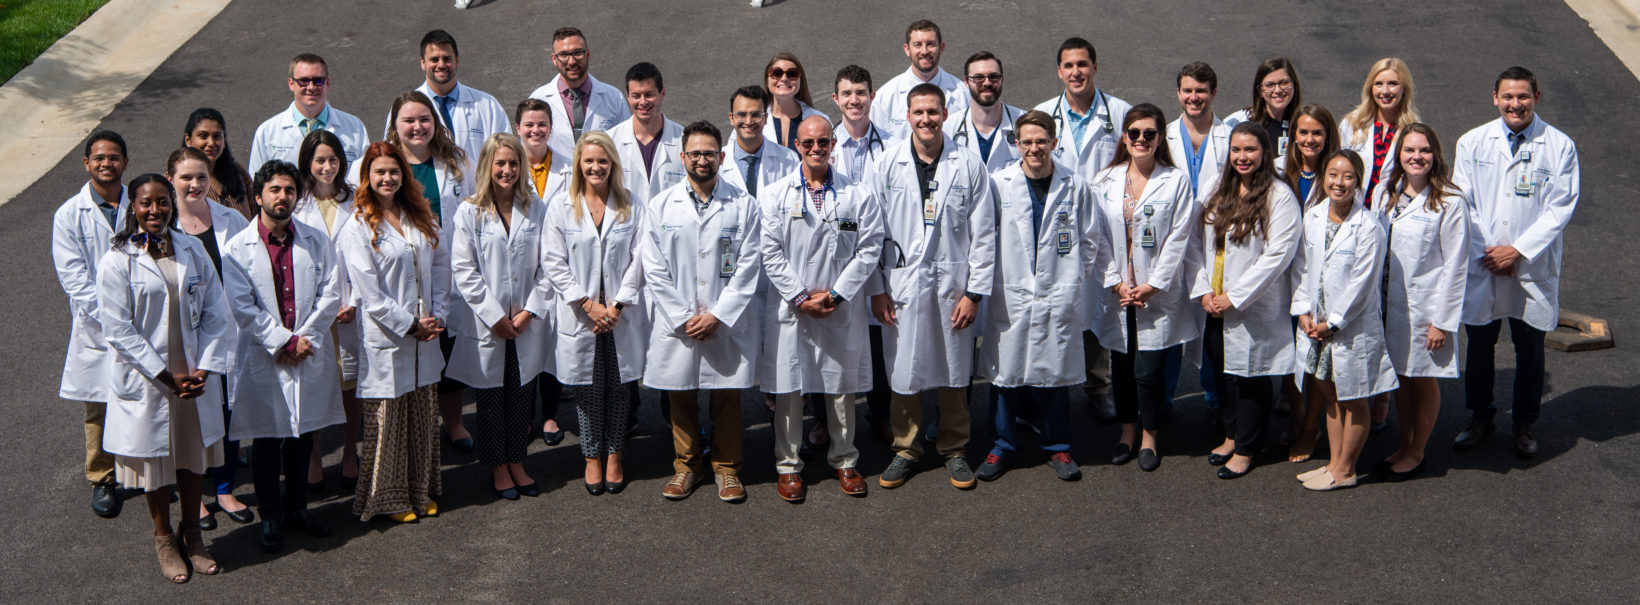 Graduate Medical Education residents and fellows pose for a group photo.